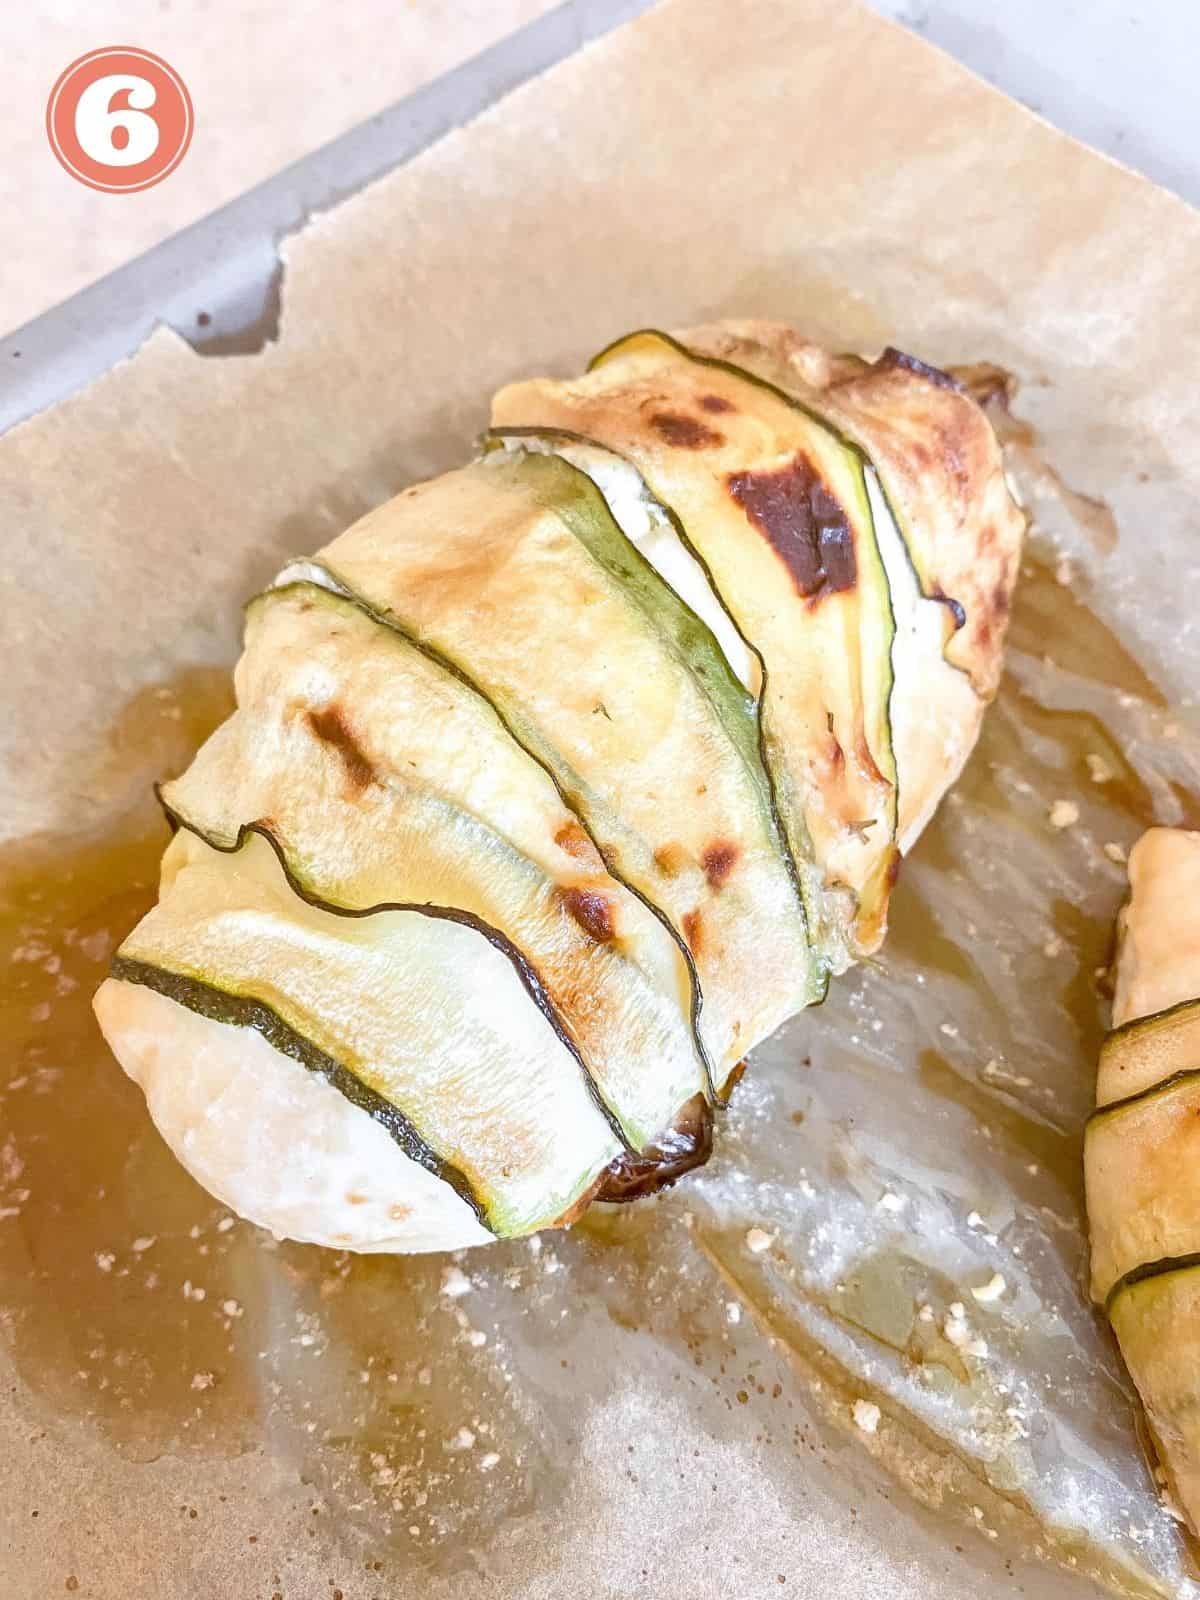 zucchini wrapped chicken on a baking tray.